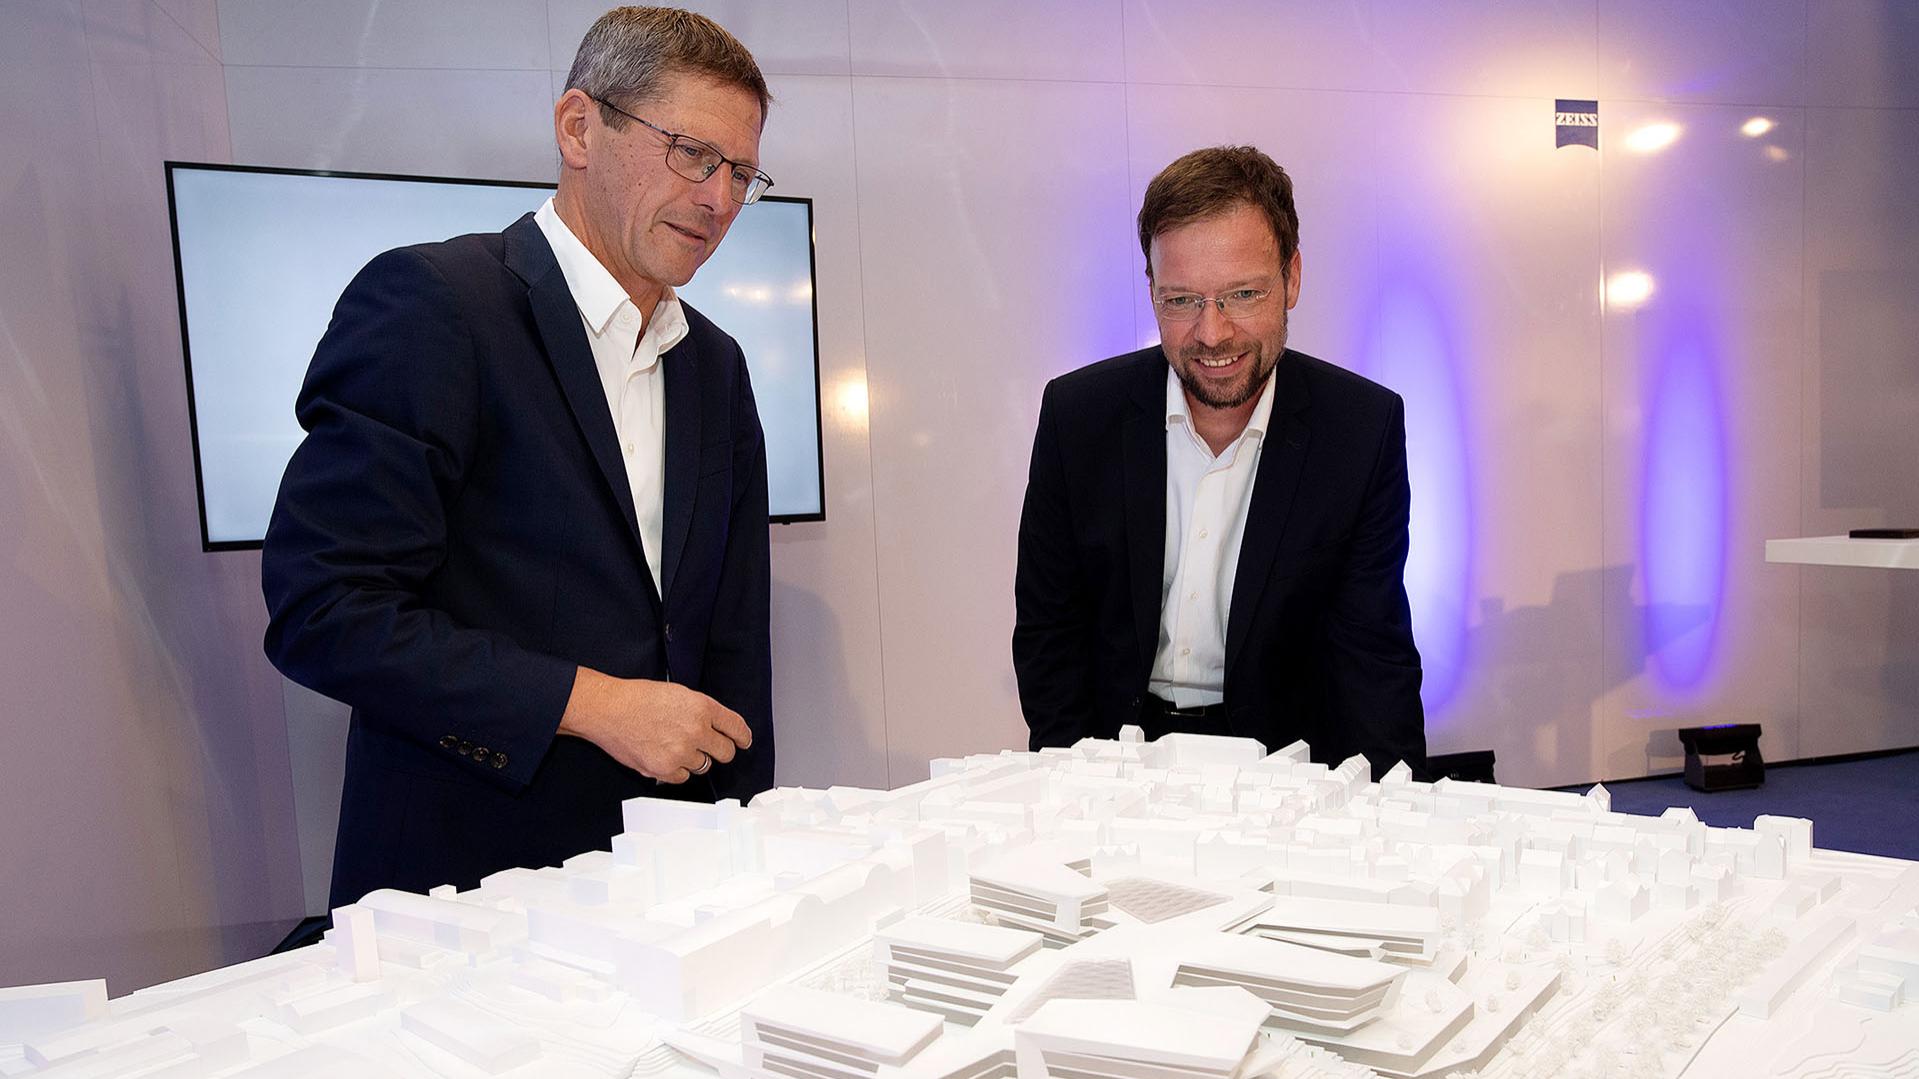 Prof. Dr. Michael Kaschke; President & CEO of Carl Zeiss AG and Dr. Thomas Nitzsche; Mayor of the city of Jena (from left), unveiled the result from the architectural competition for ZEISS' new high-tech site in Jena.